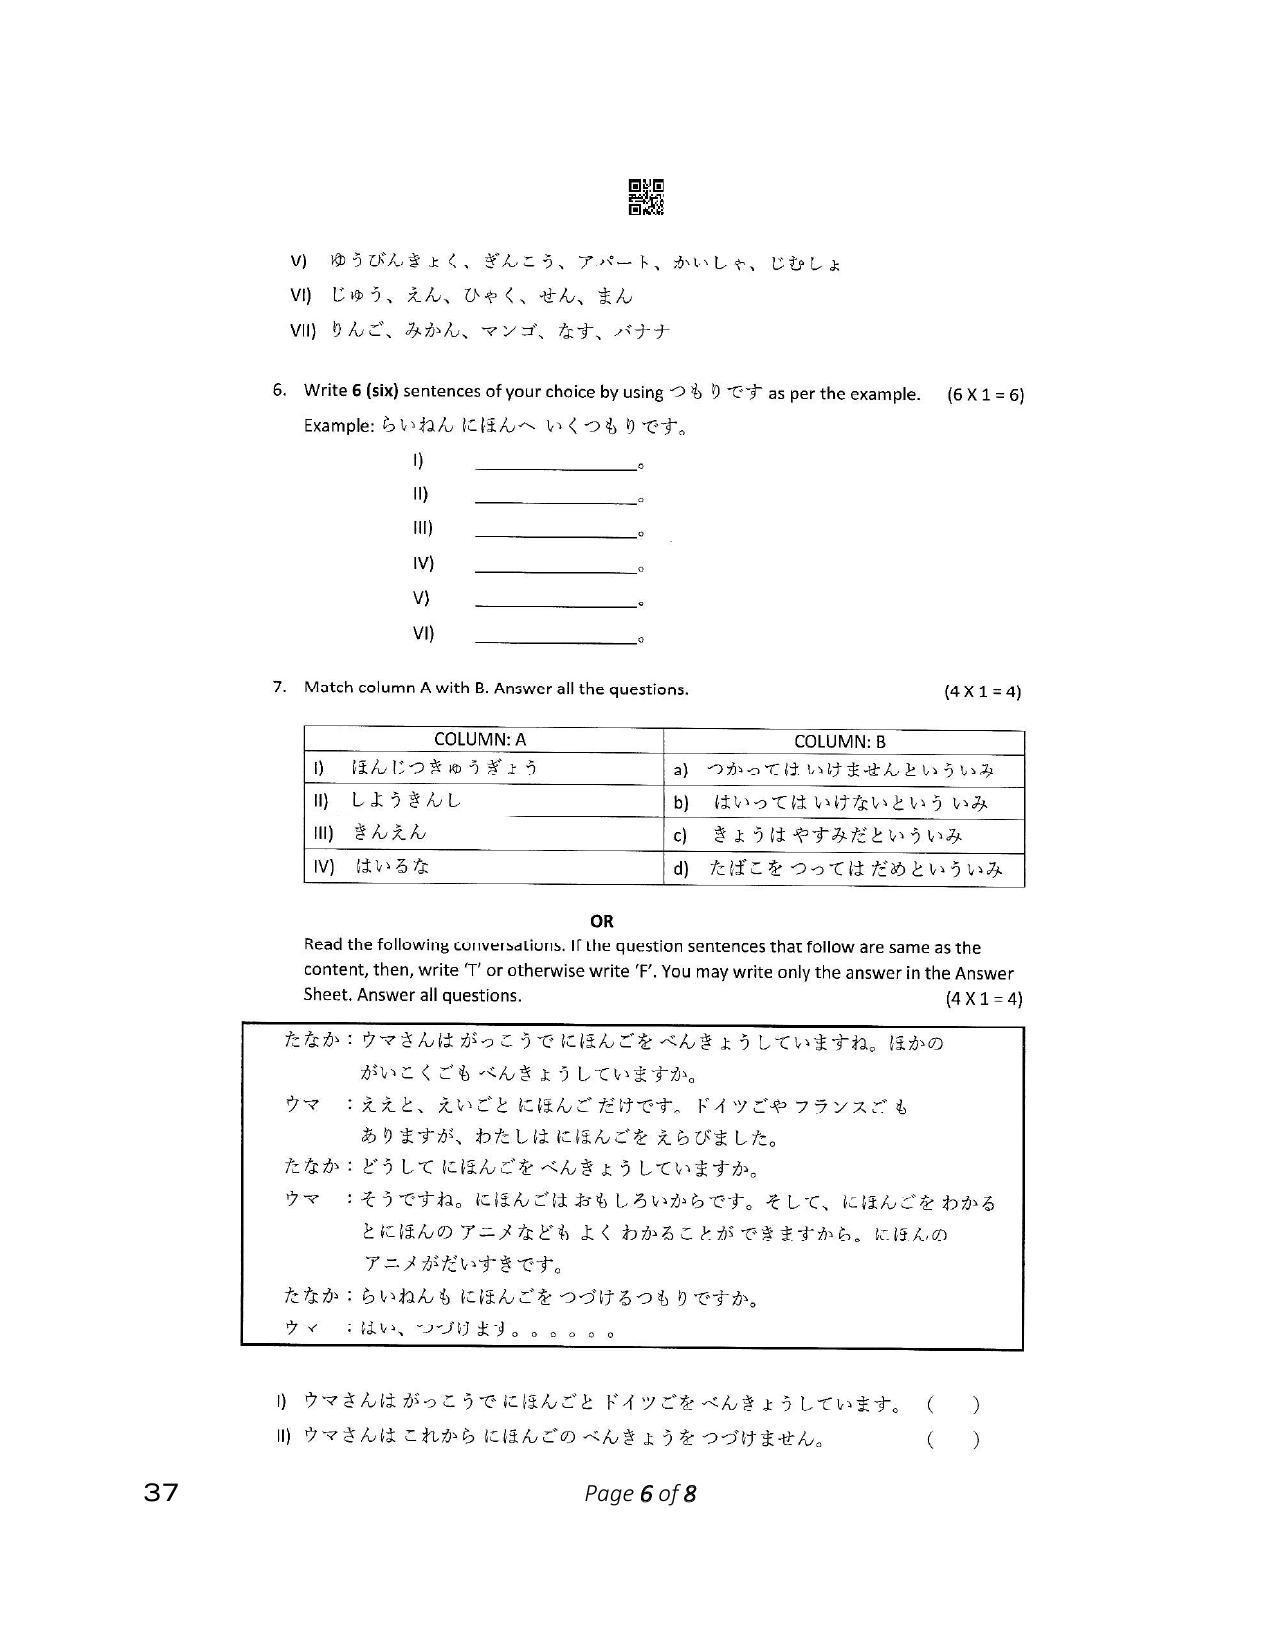 CBSE Class 12 37_Japanese 2023 Question Paper - Page 6